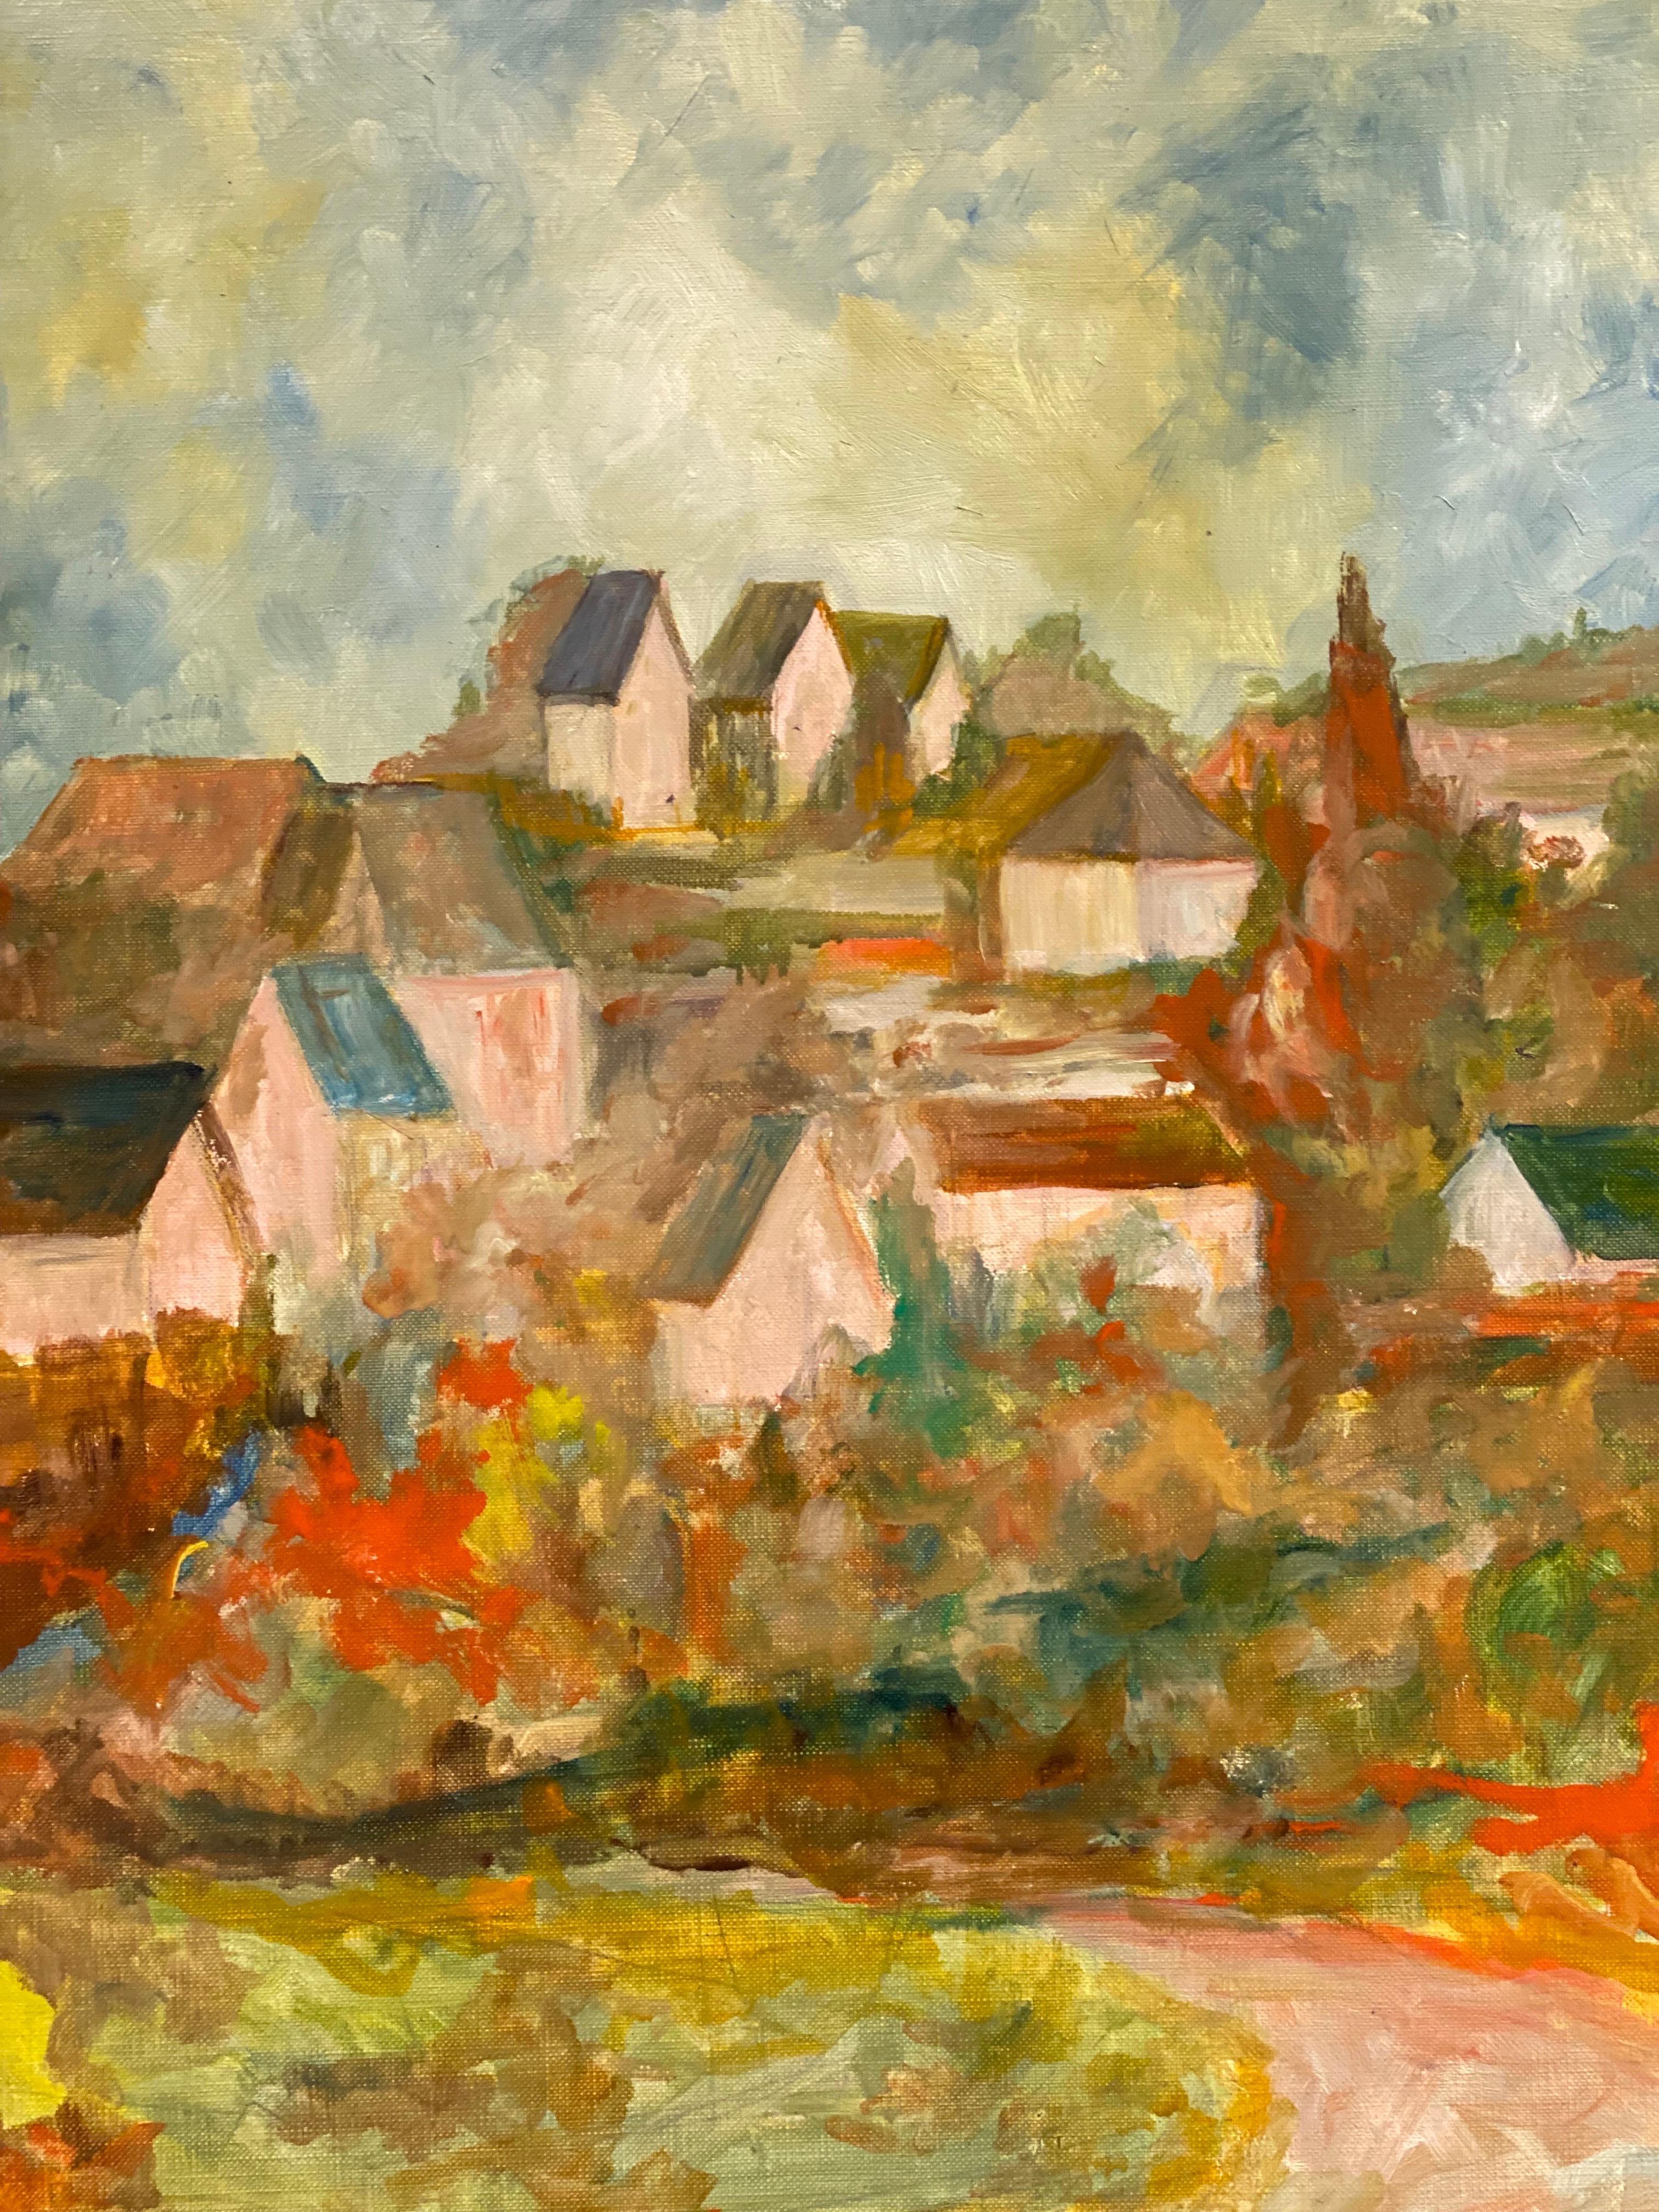 Warm Houses in Provencal Landscape, beautiful ochre and green colors - Painting by French Impressionist